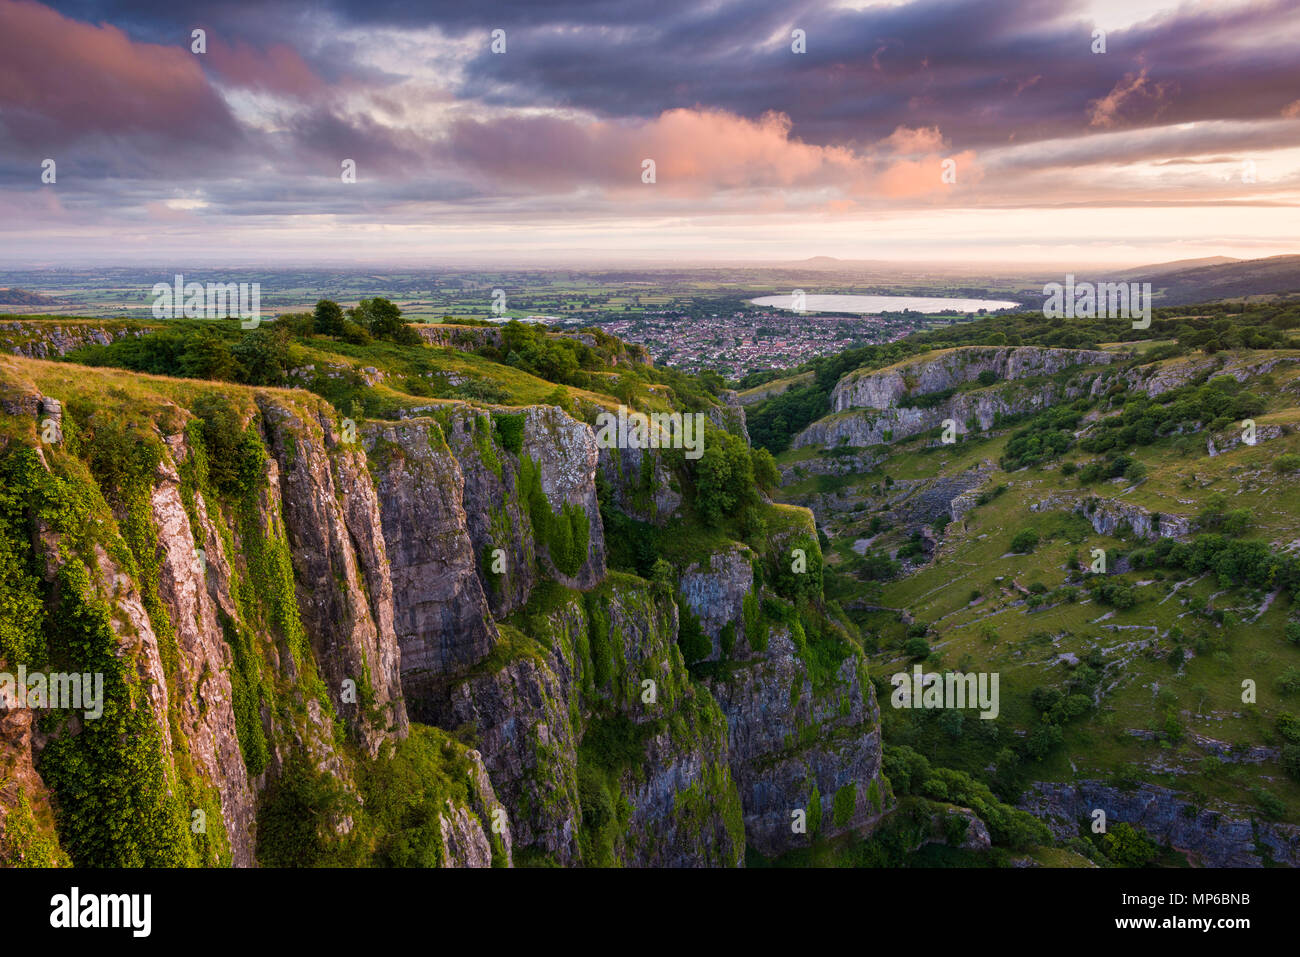 View over Cheddar Gorge and the village of Cheddar on the southern edge of the Mendip Hills, Somerset, England. Stock Photo